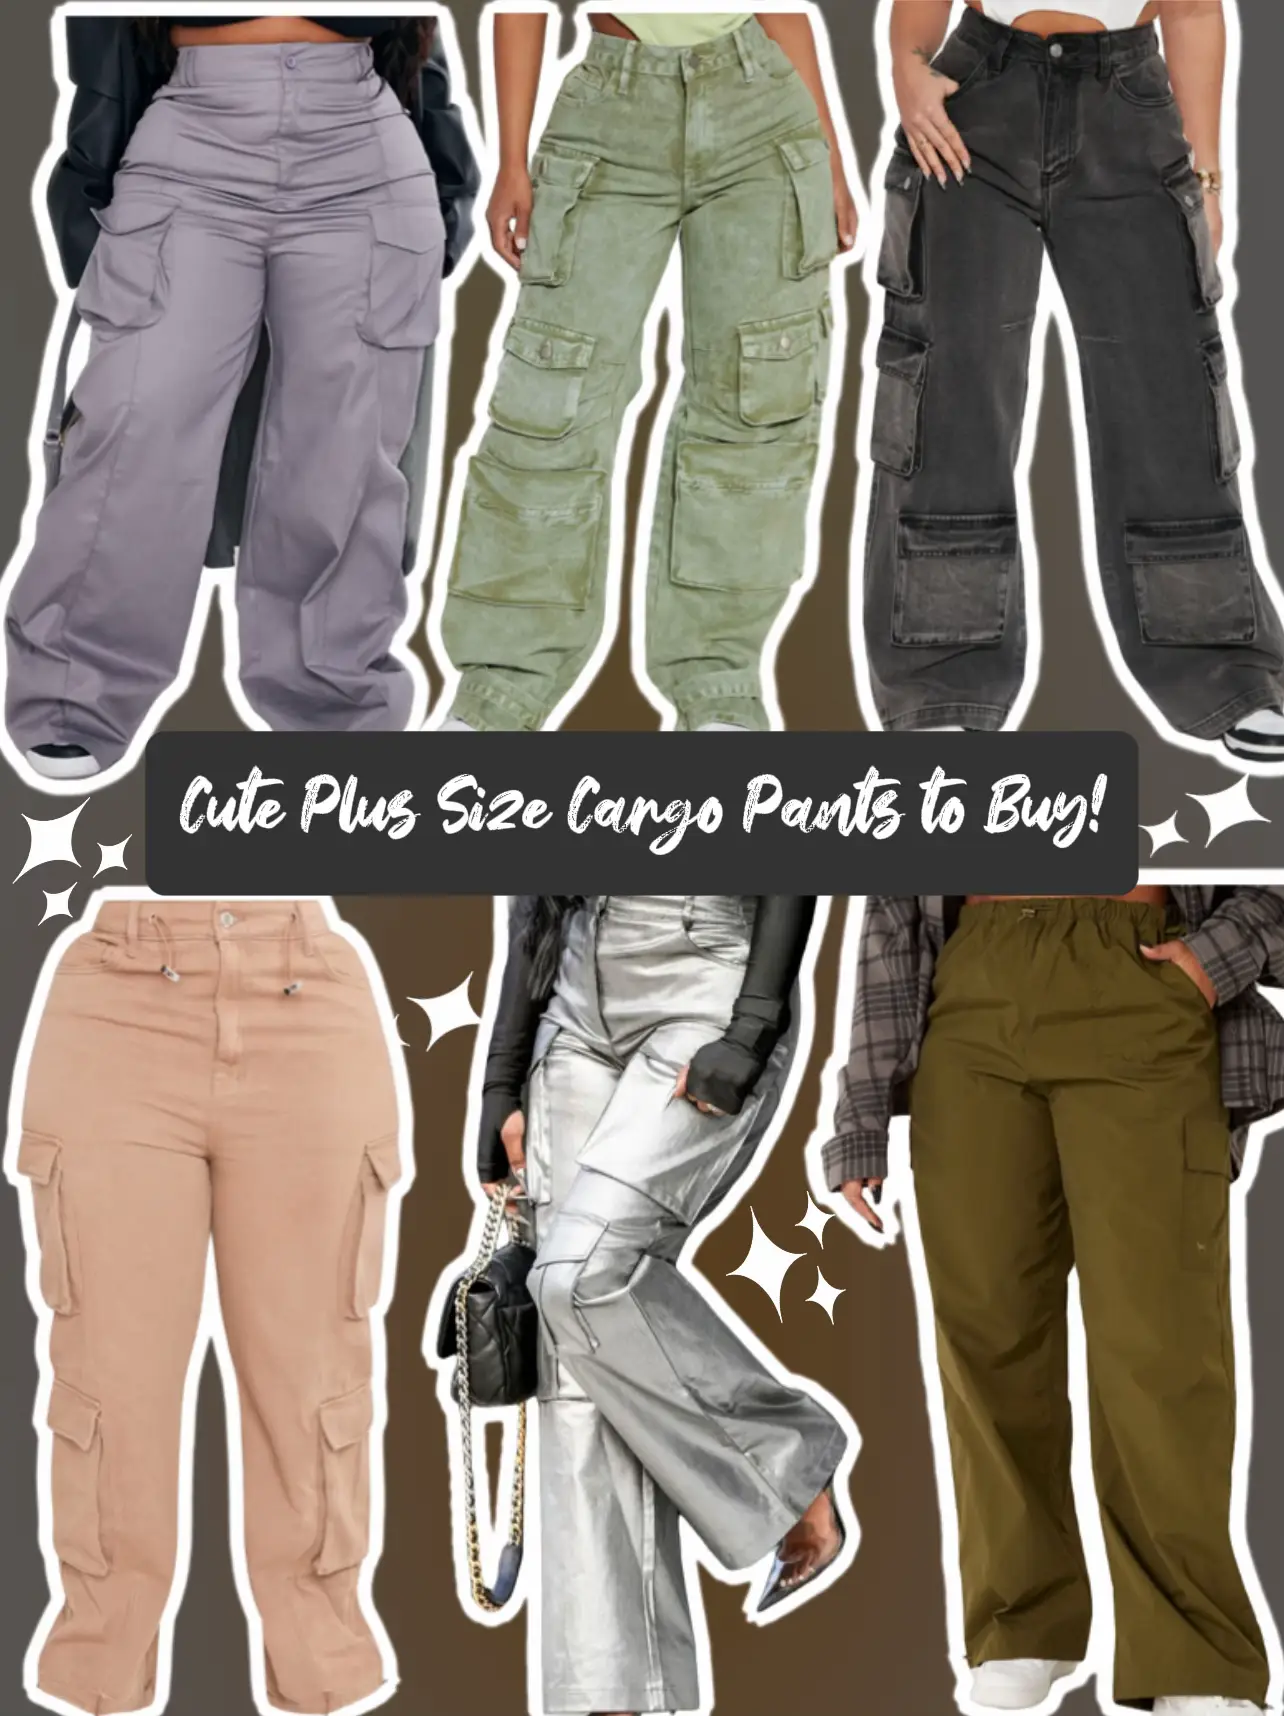 How to elevate Cargo Pants for the office